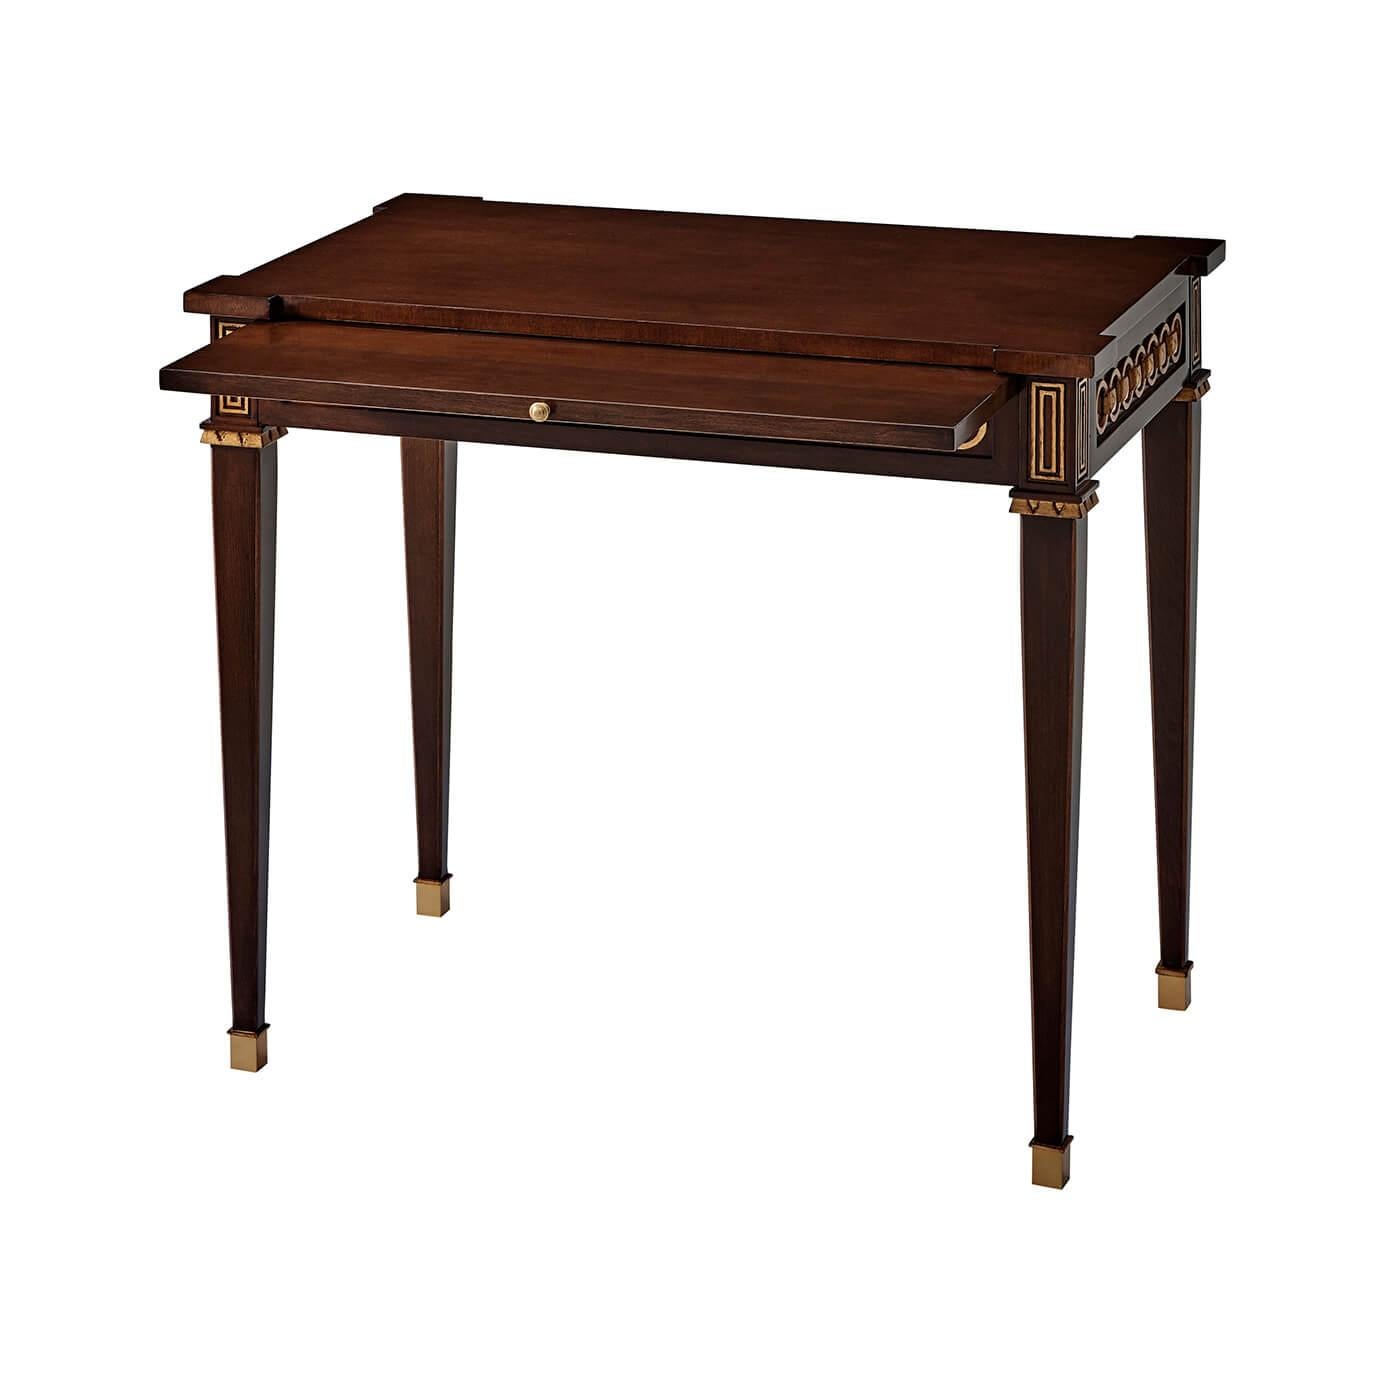 This neo-classic mahogany side table evokes historical models with familiar flourishes: interlocking rings and tapered legs capped in brass. With pyramid punctuation along the frieze apron, and a functional slide. Hand-brushed frieze details flesh